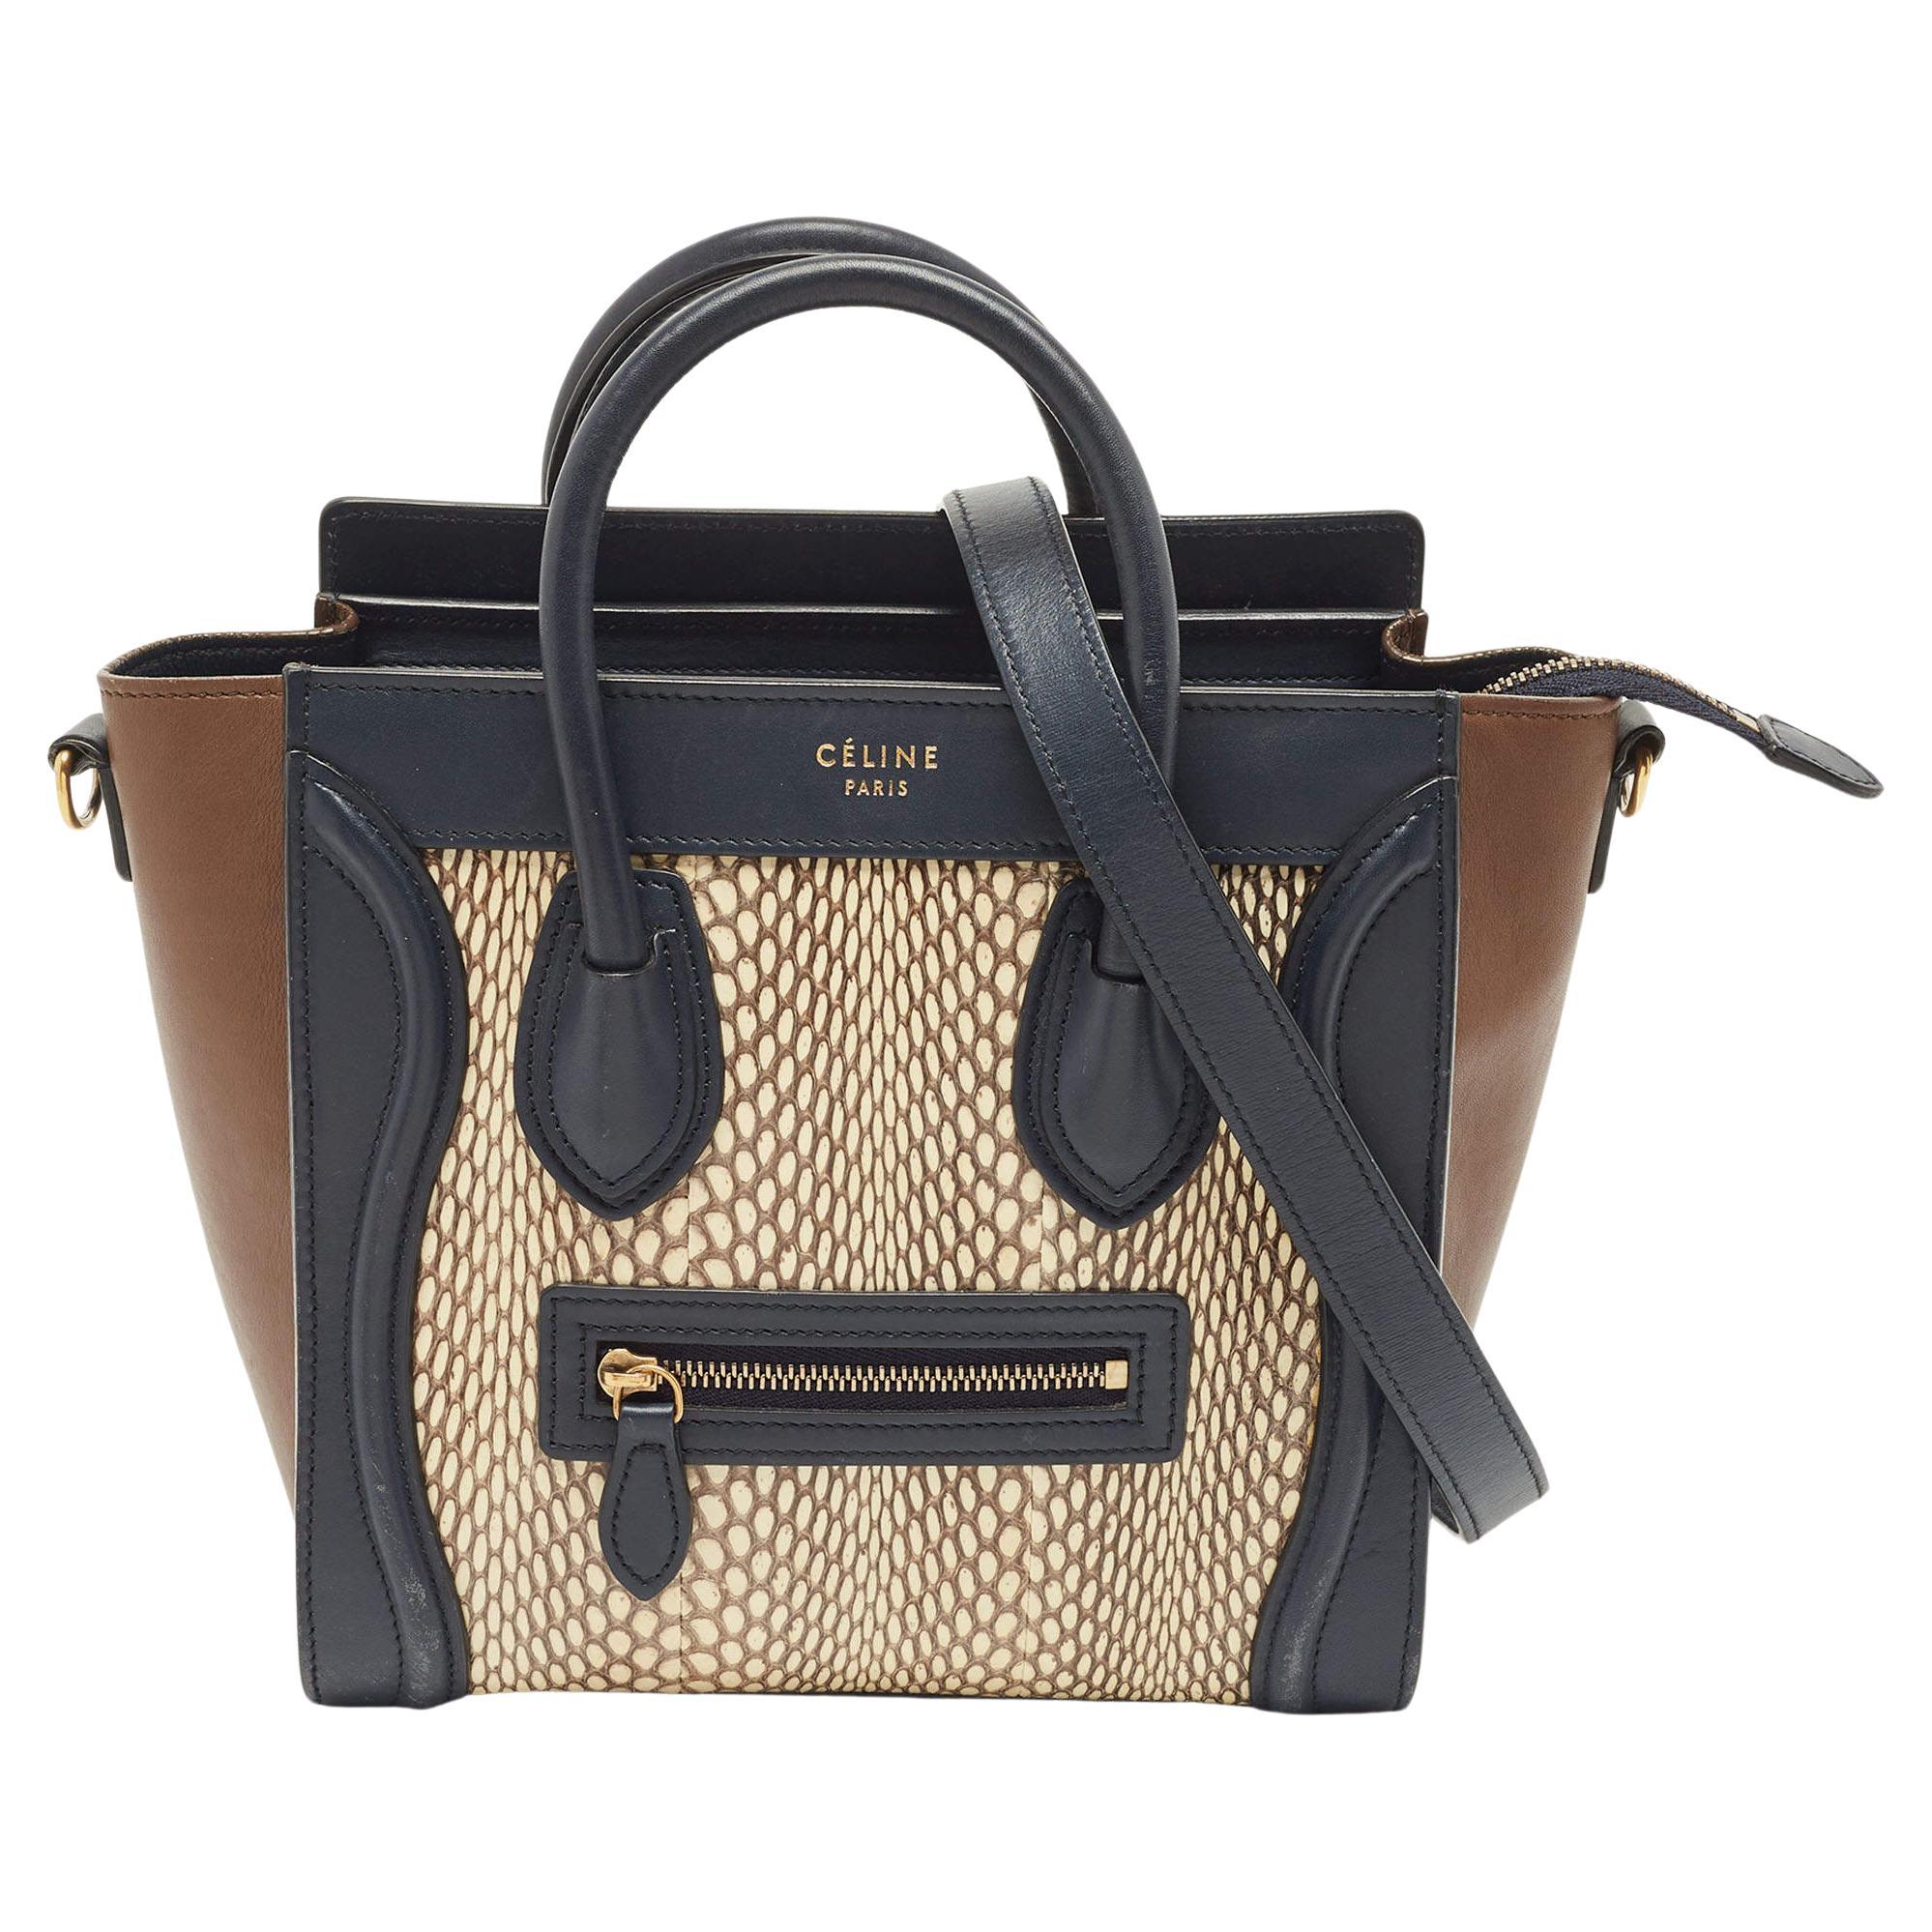 Celine Tricolor Leather and Watersnake Nano Luggage Tote